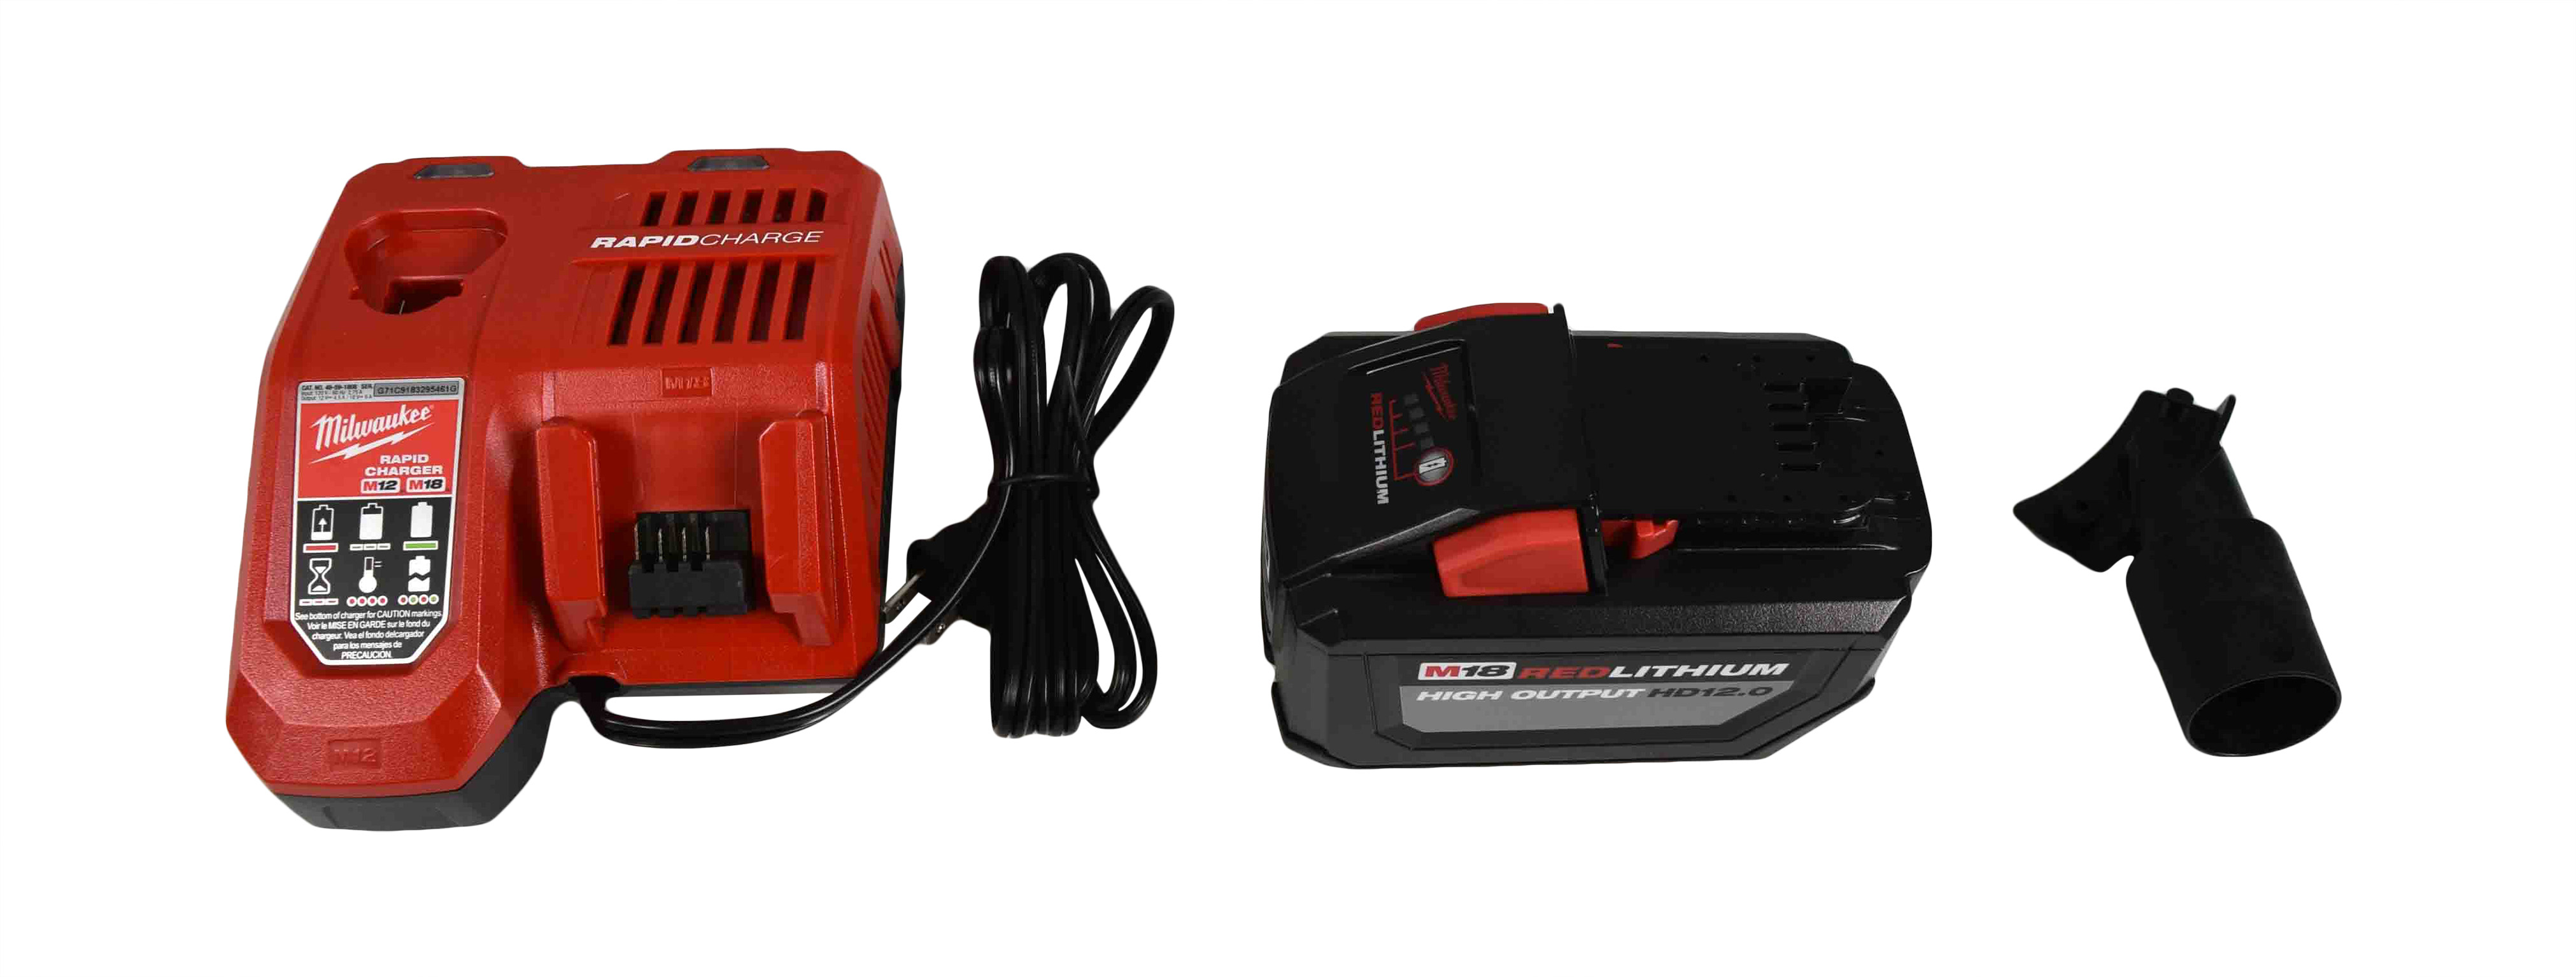 Milwaukee M18 18V Fuel 7-1/4" Circular Saw Kit 2732-21HD with 12Ah Battery, Charger, Contractor Tool Bag - image 8 of 9